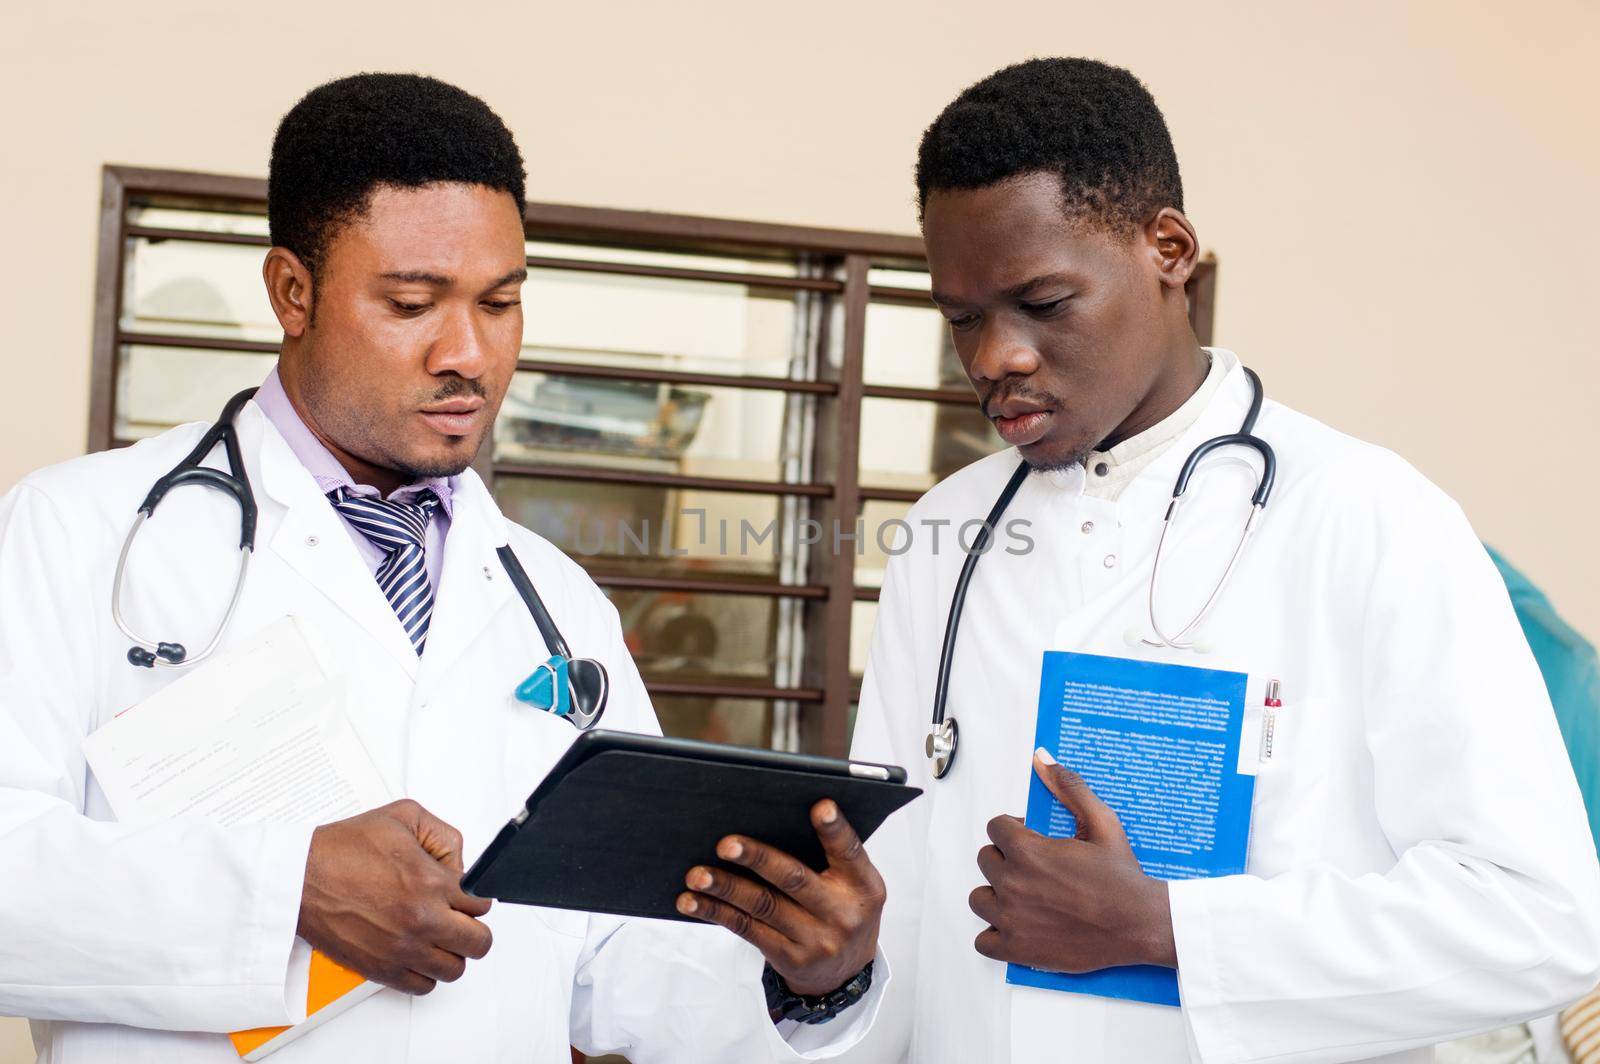 doctor and professor standing talking on a digital tablet at the hospital.